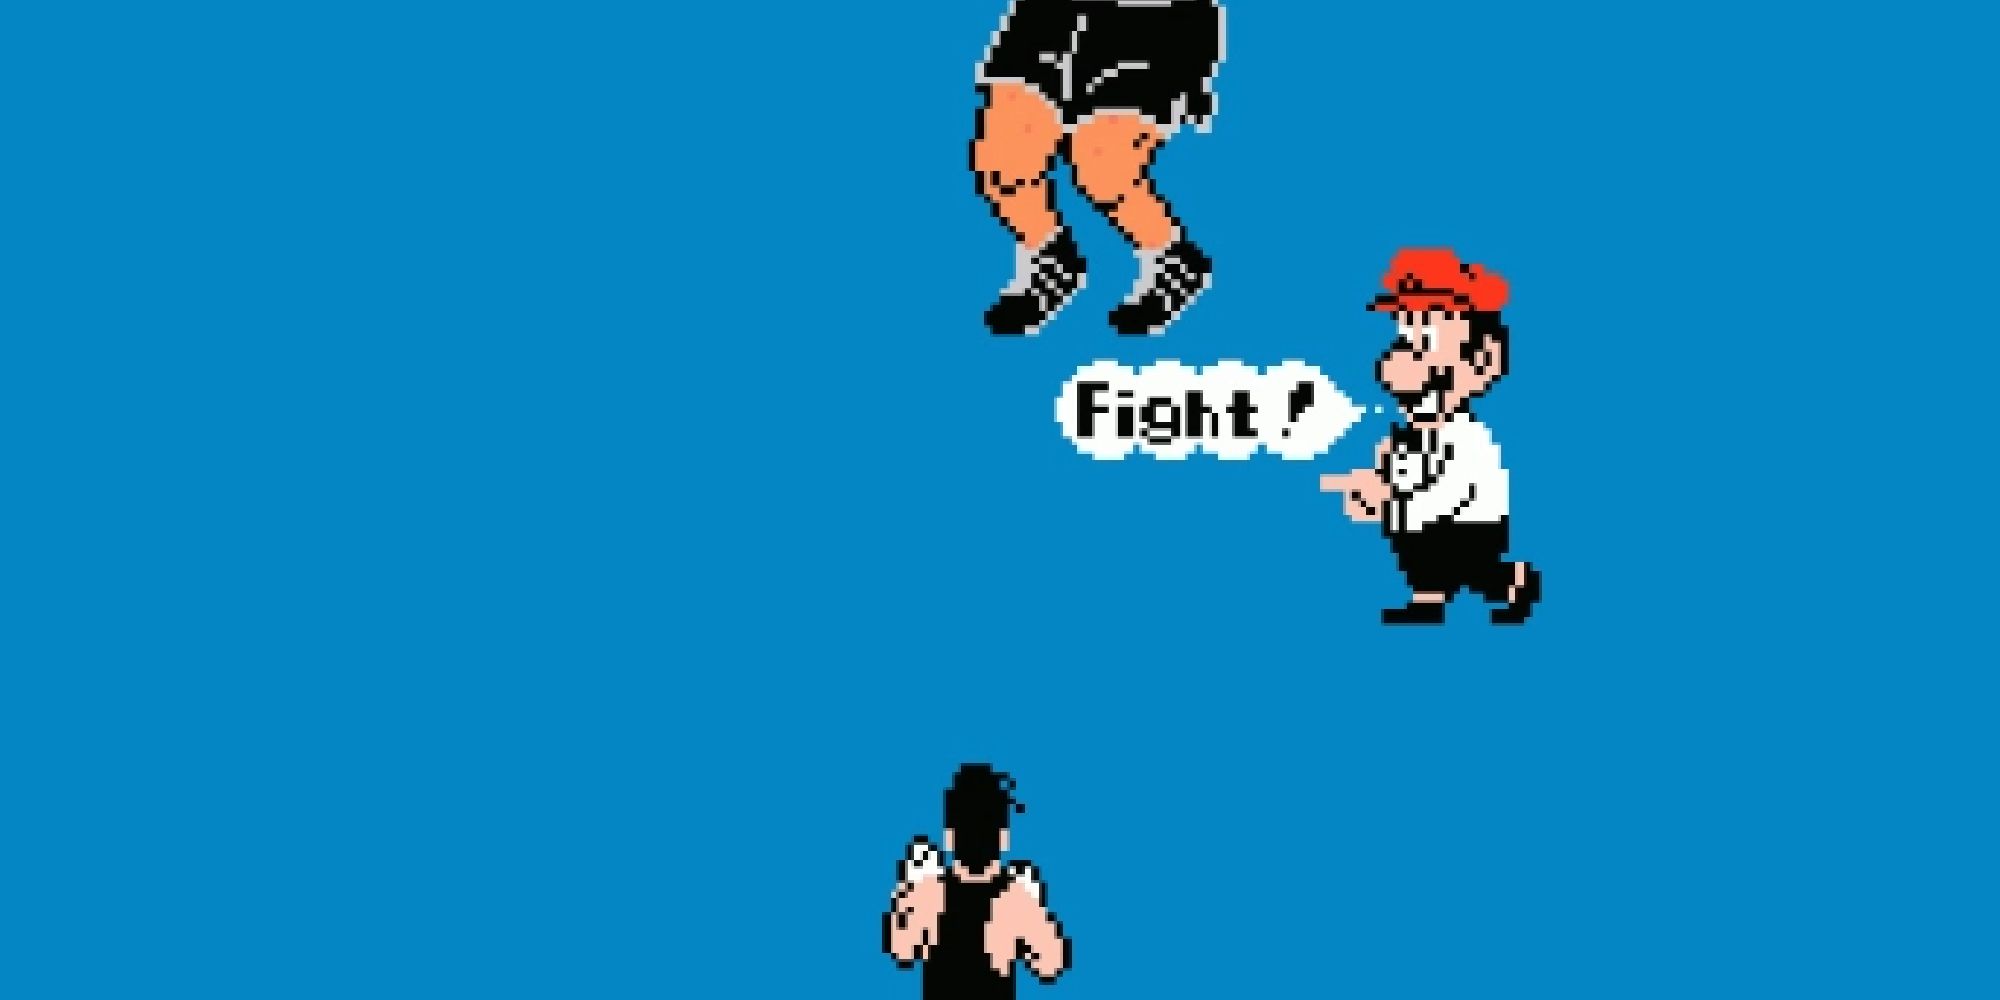 Mario counting down a fight for Little Mac in Punch-Out!! for NES